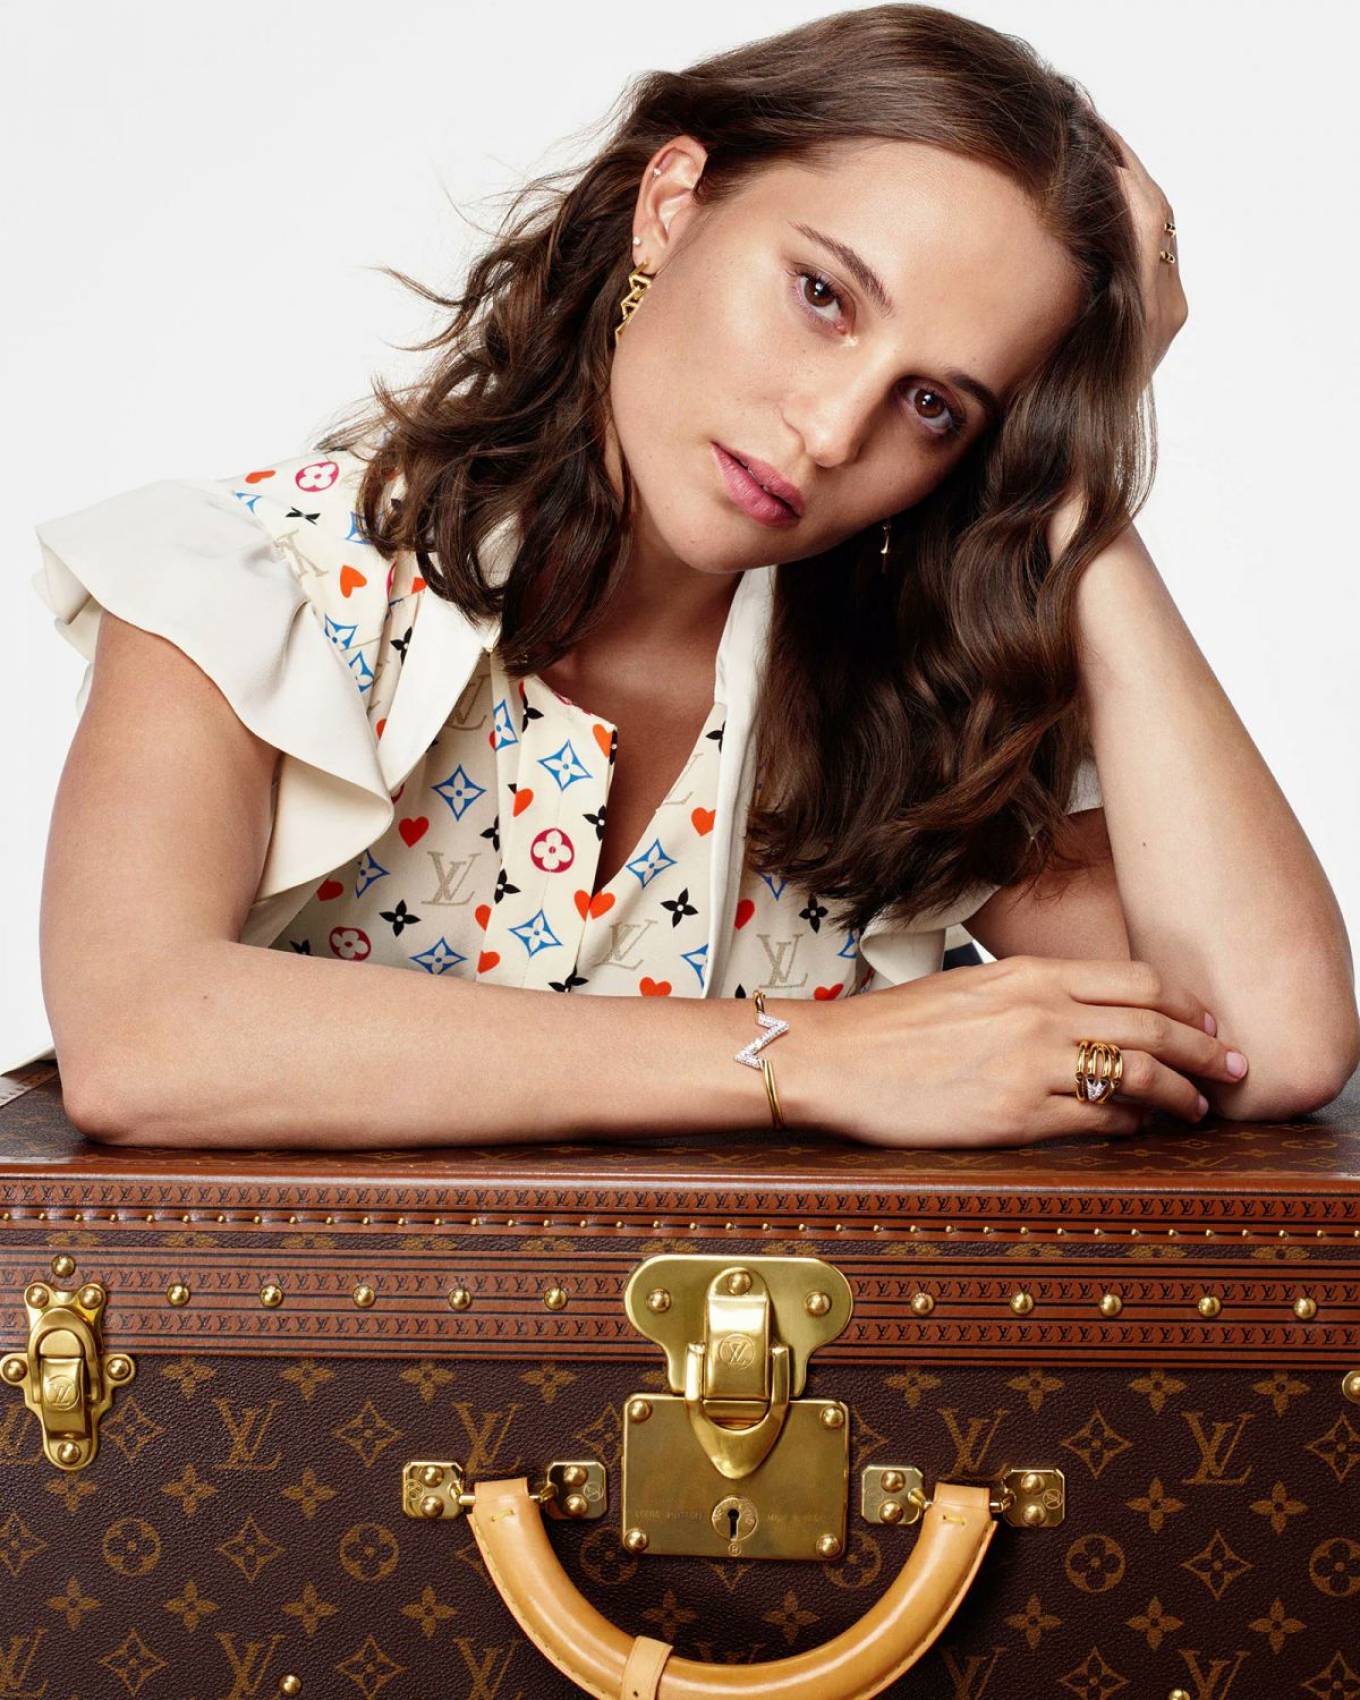 Alicia Vikander – Louis Vuitton Journey Home for the Holidays (2020 Collection)